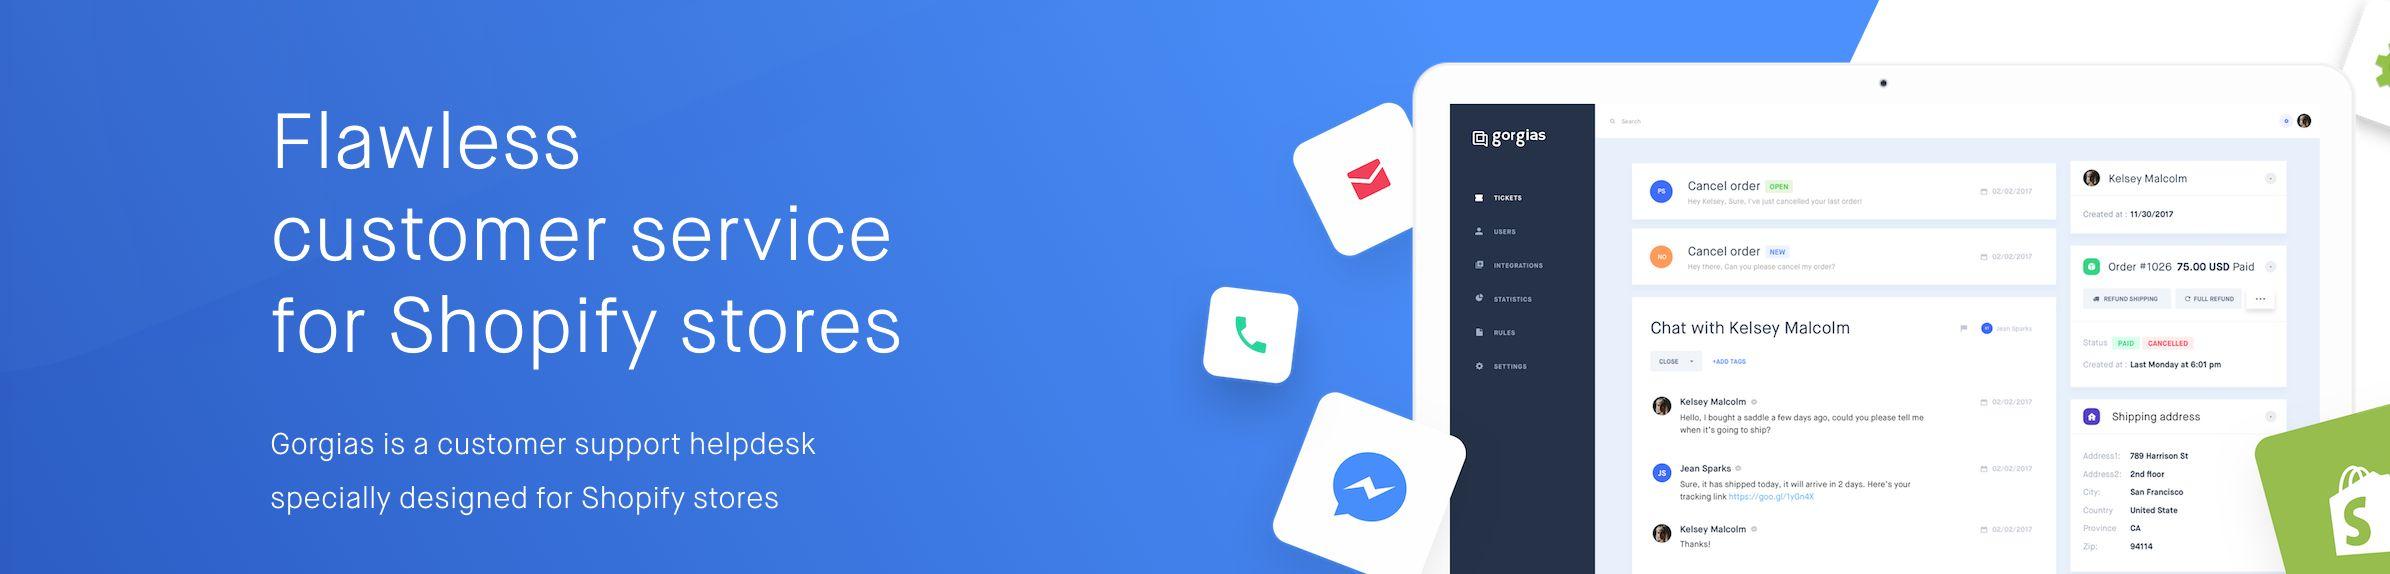 Review Gorgias: The All-in-One Customer Support Platform - Appvizer